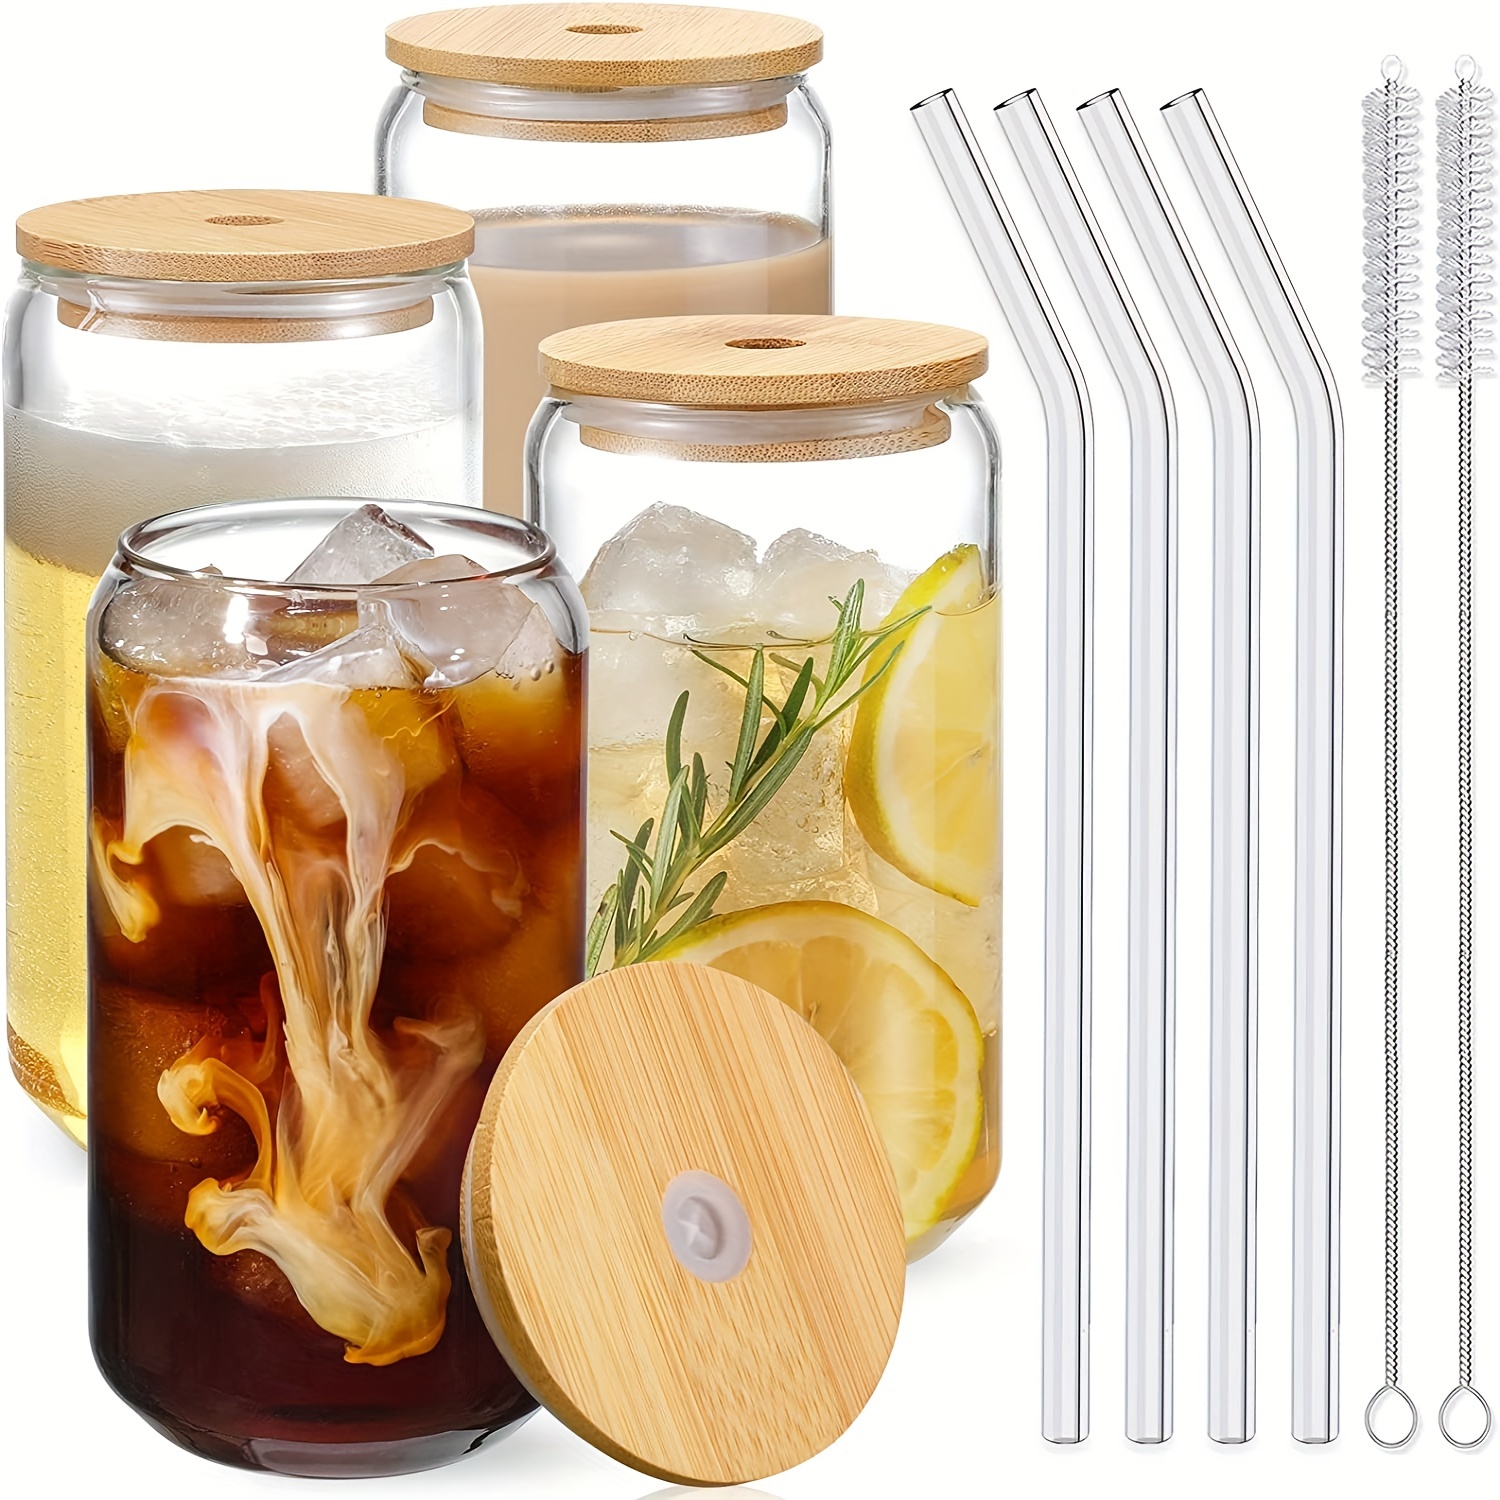  Glass Cups with Bamboo Lids and Straws,24oz Tumbler With  Handle,2 Pack Mason Jar with Lid and Straw-Wide Mouth Reusable Drinking  Glasses,Boba Cup Smoothie Tumbler Iced Coffee Cup Travel Mug : Home